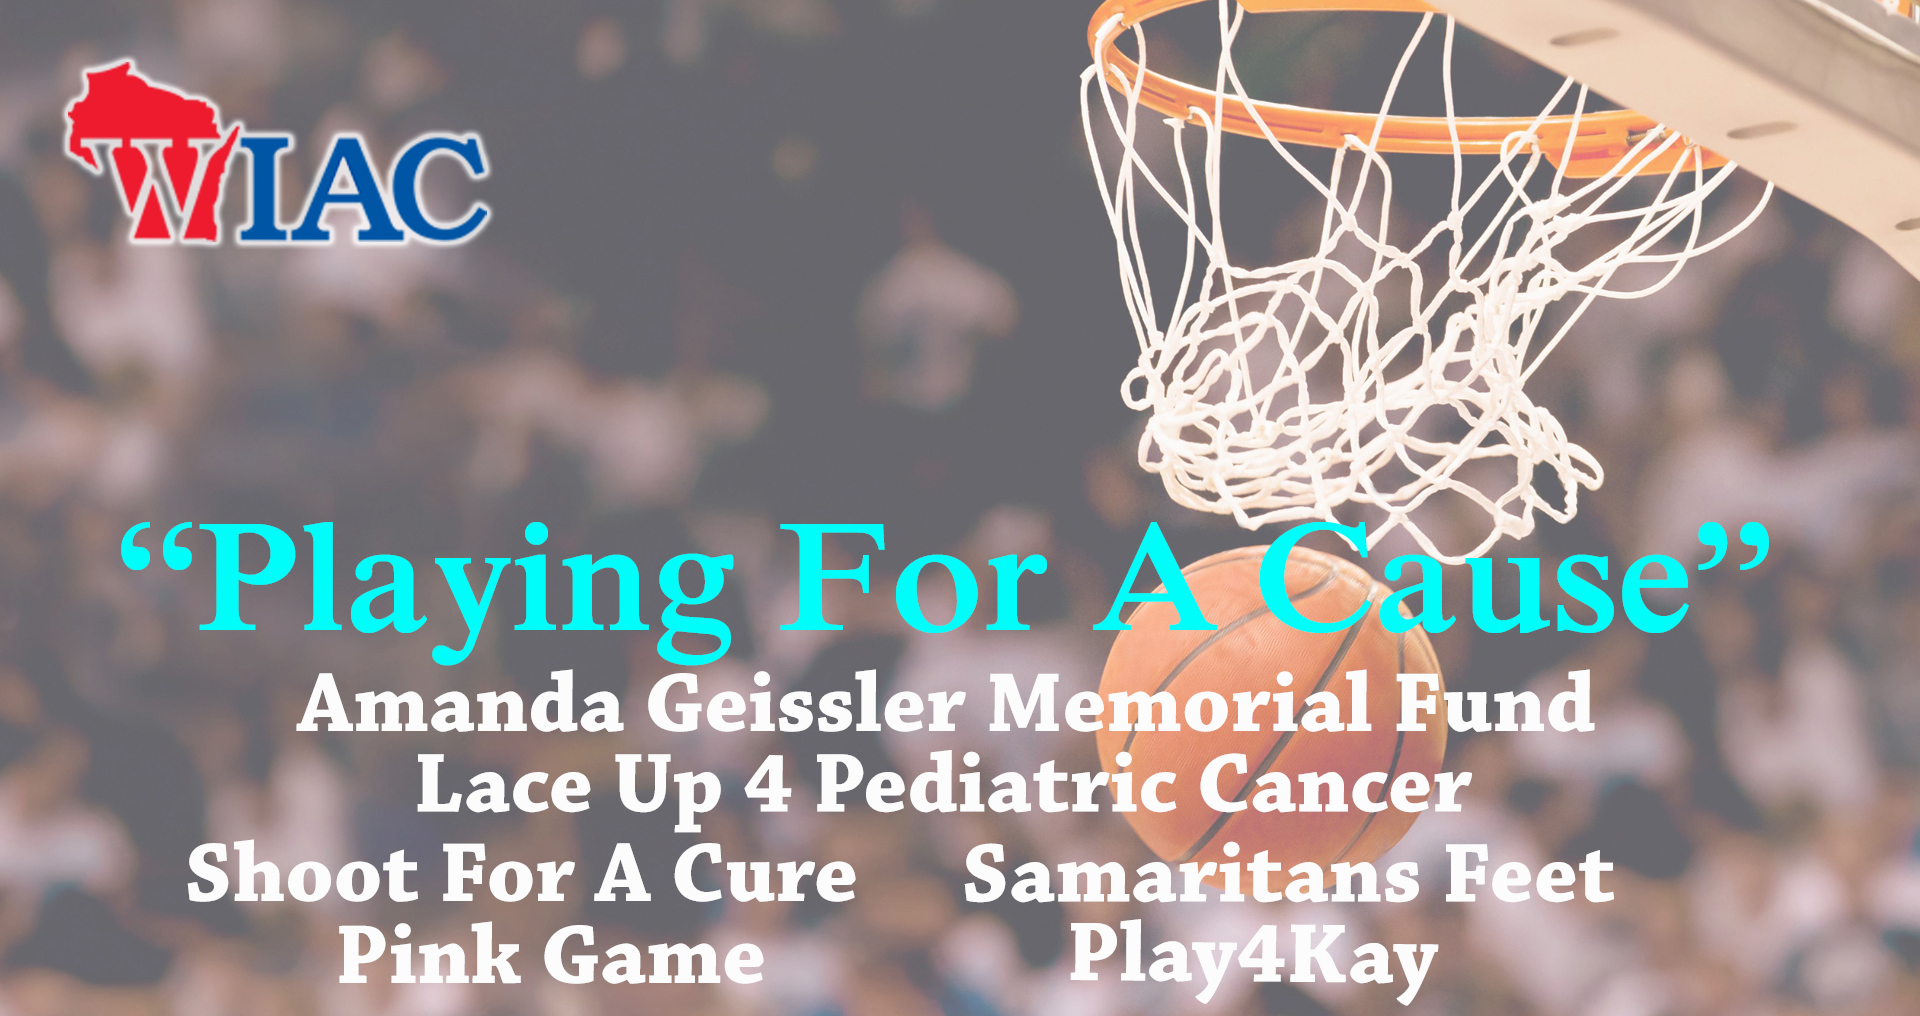 WIAC Women's Basketball Teams “Playing For A Cause”